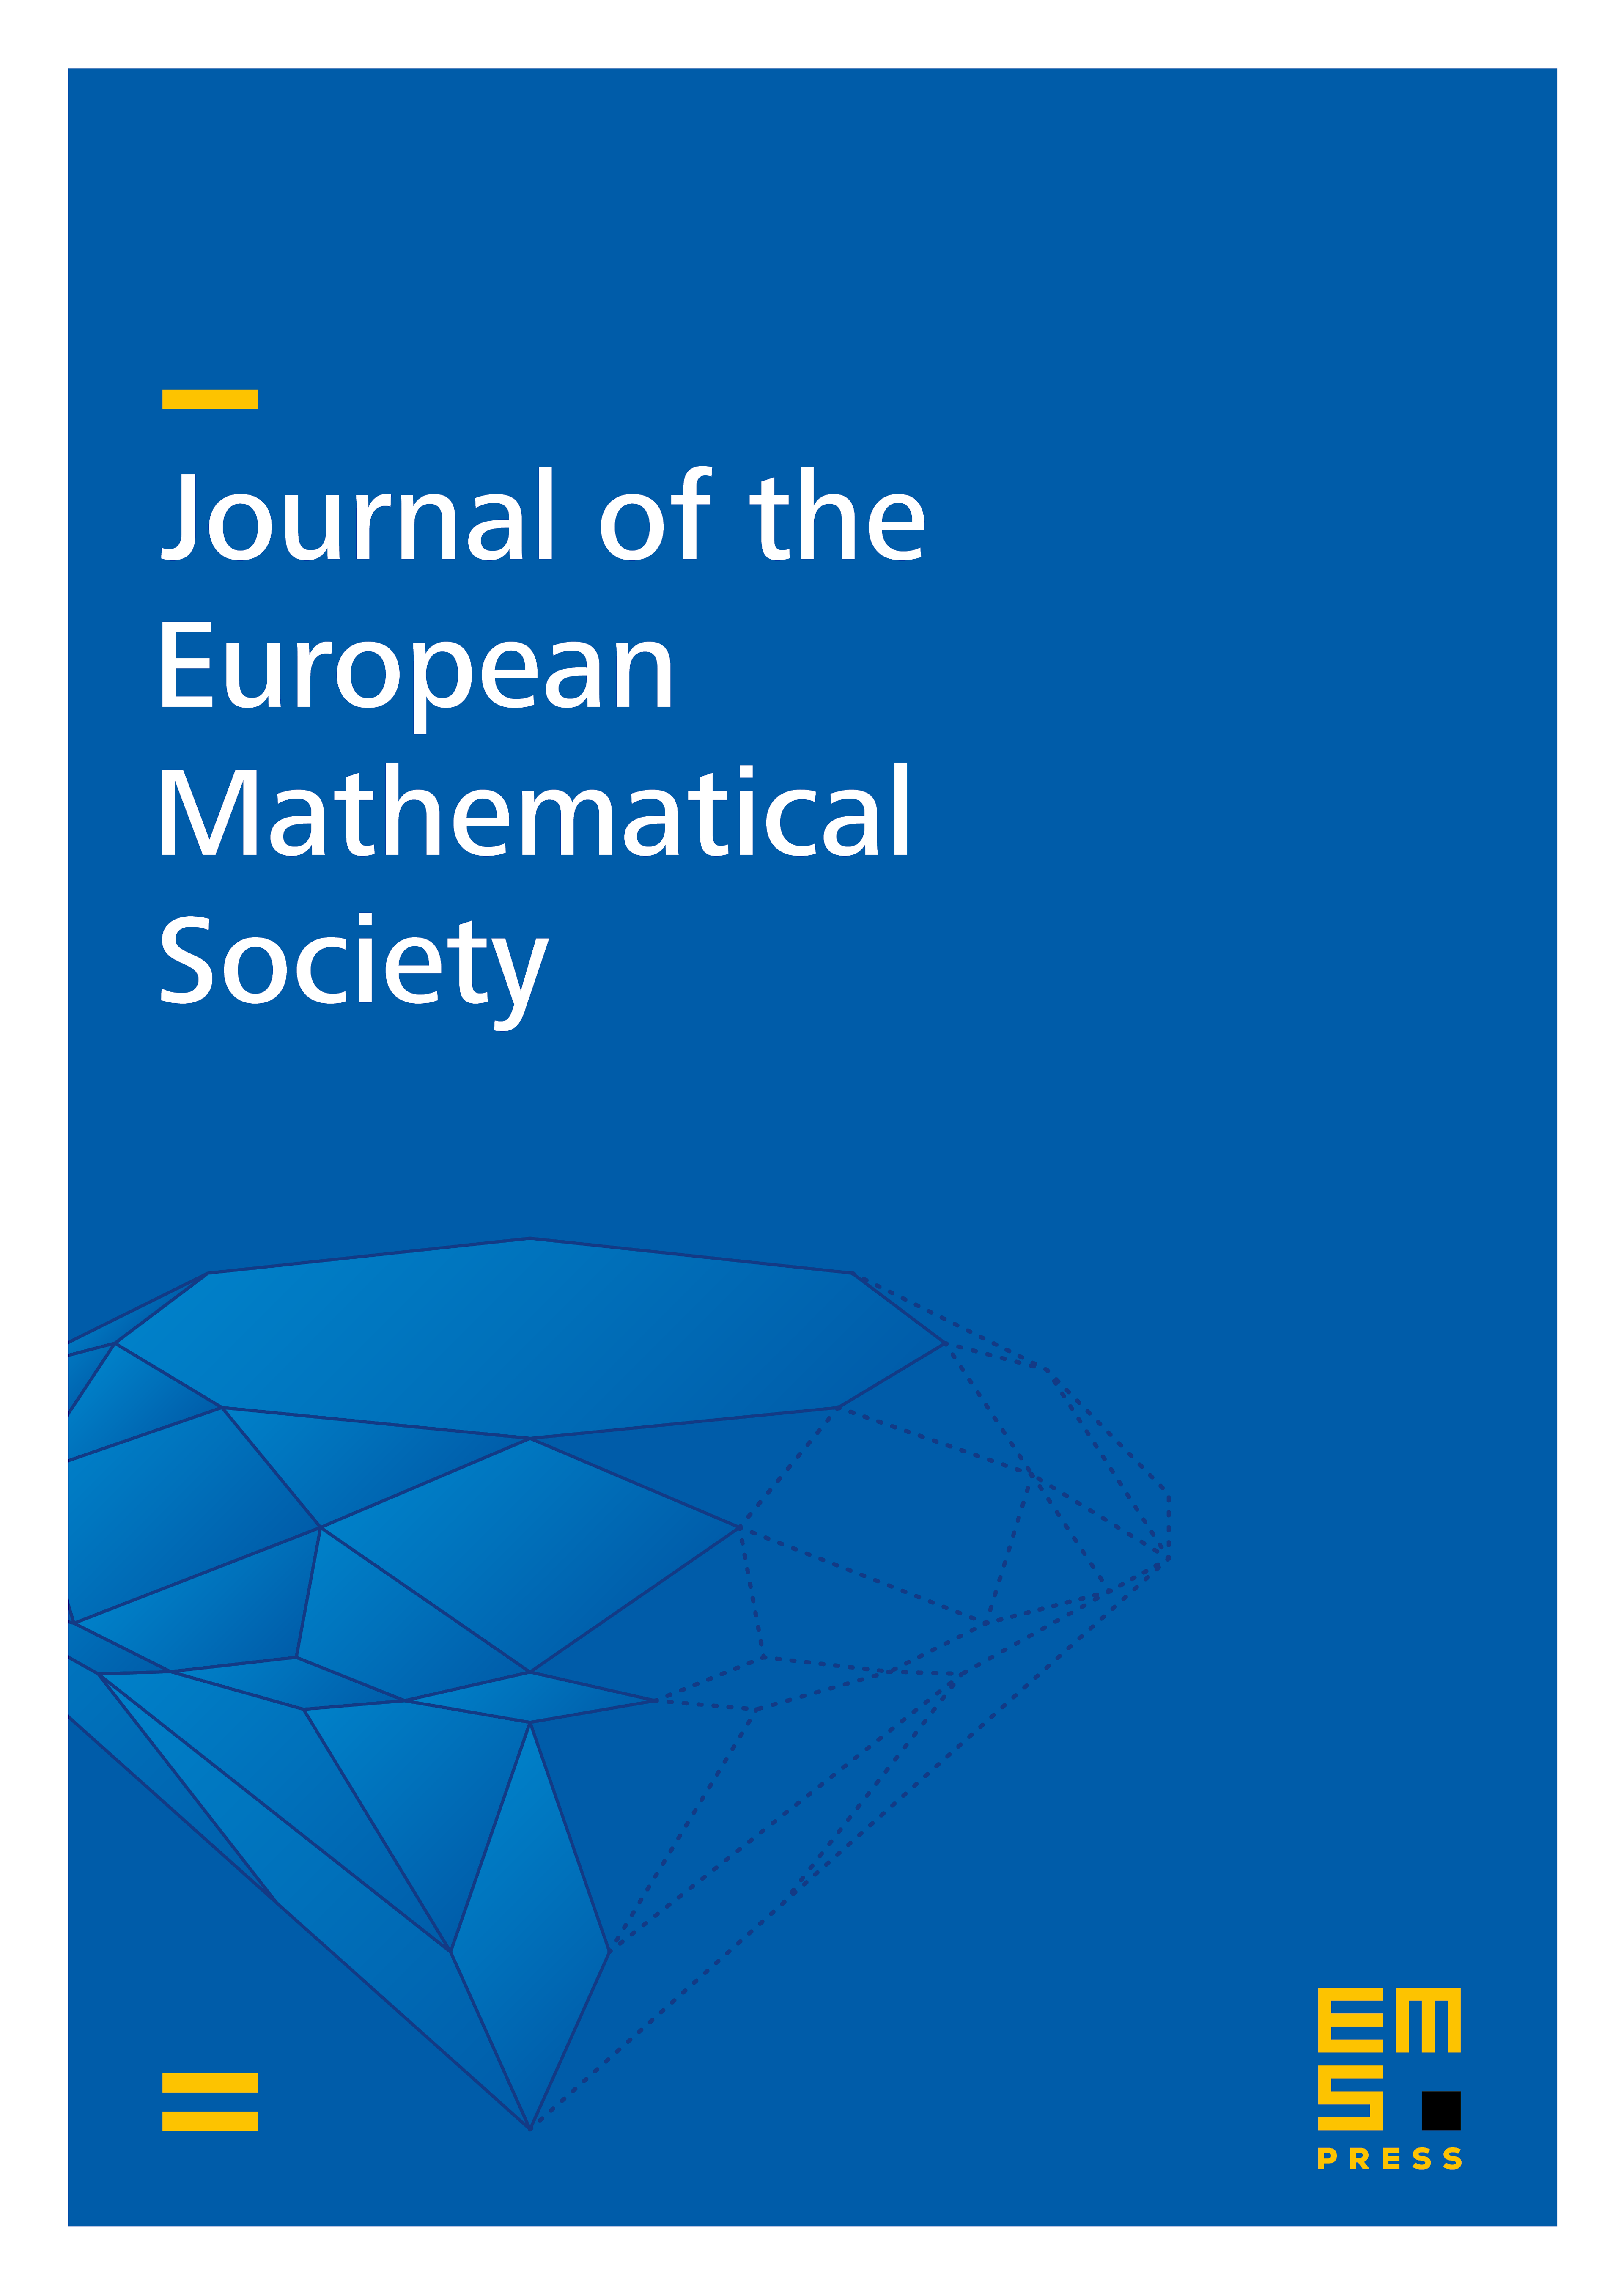 Stable ergodicity and julienne quasi-conformality cover